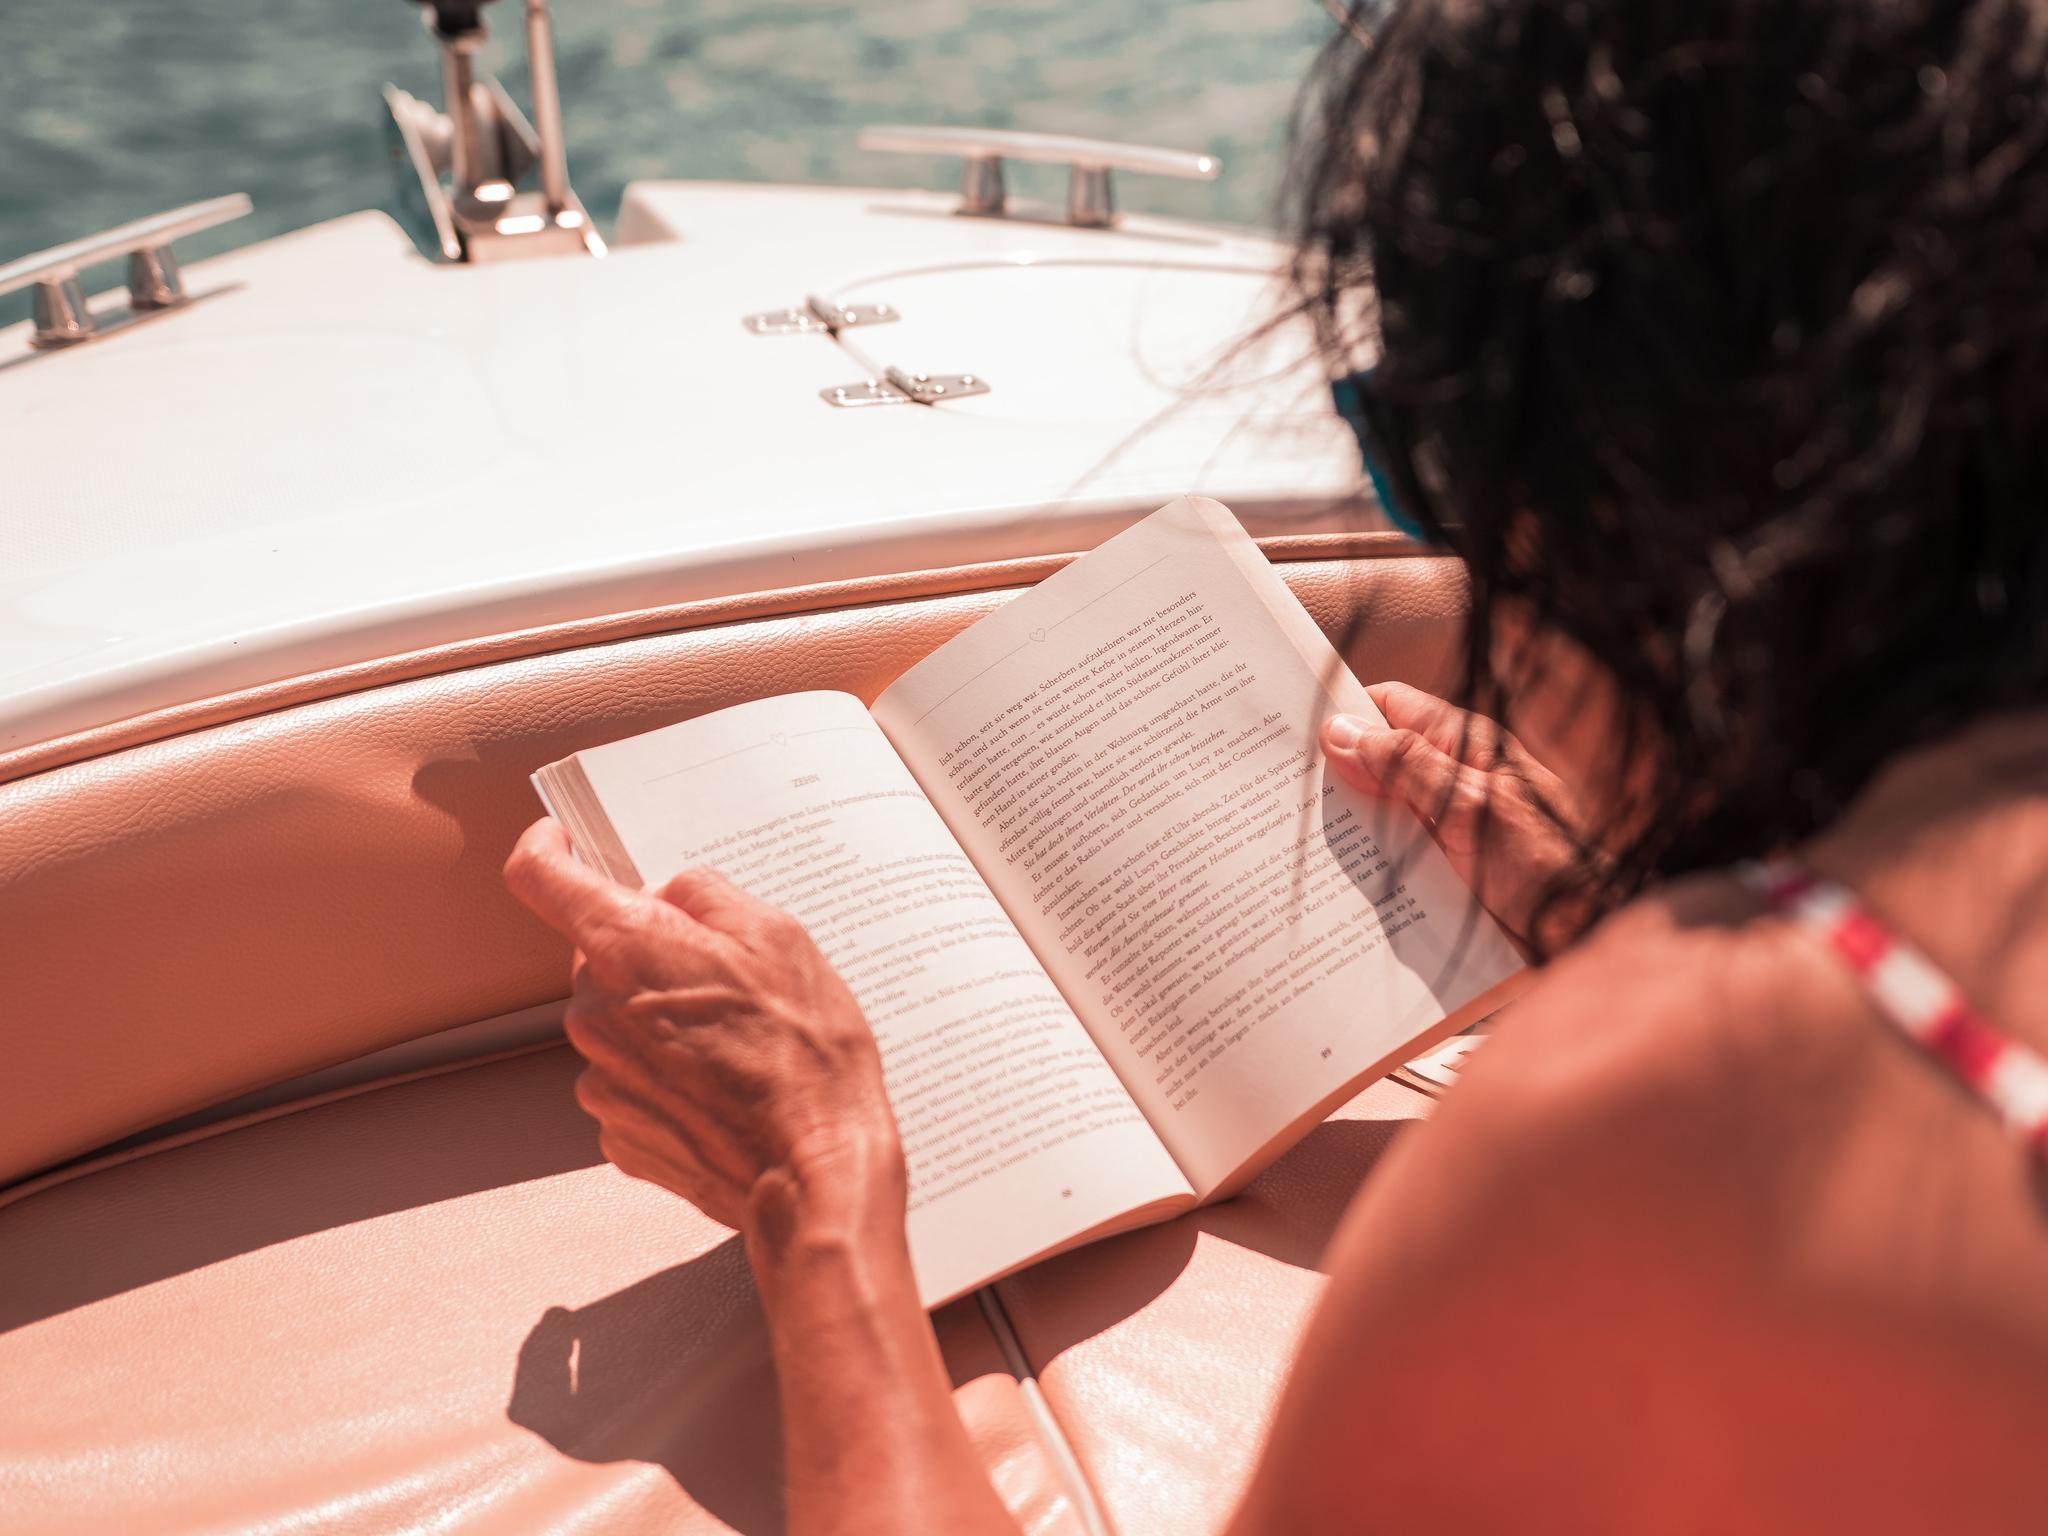 10 Beautiful Travel Books to Add to Your Collection